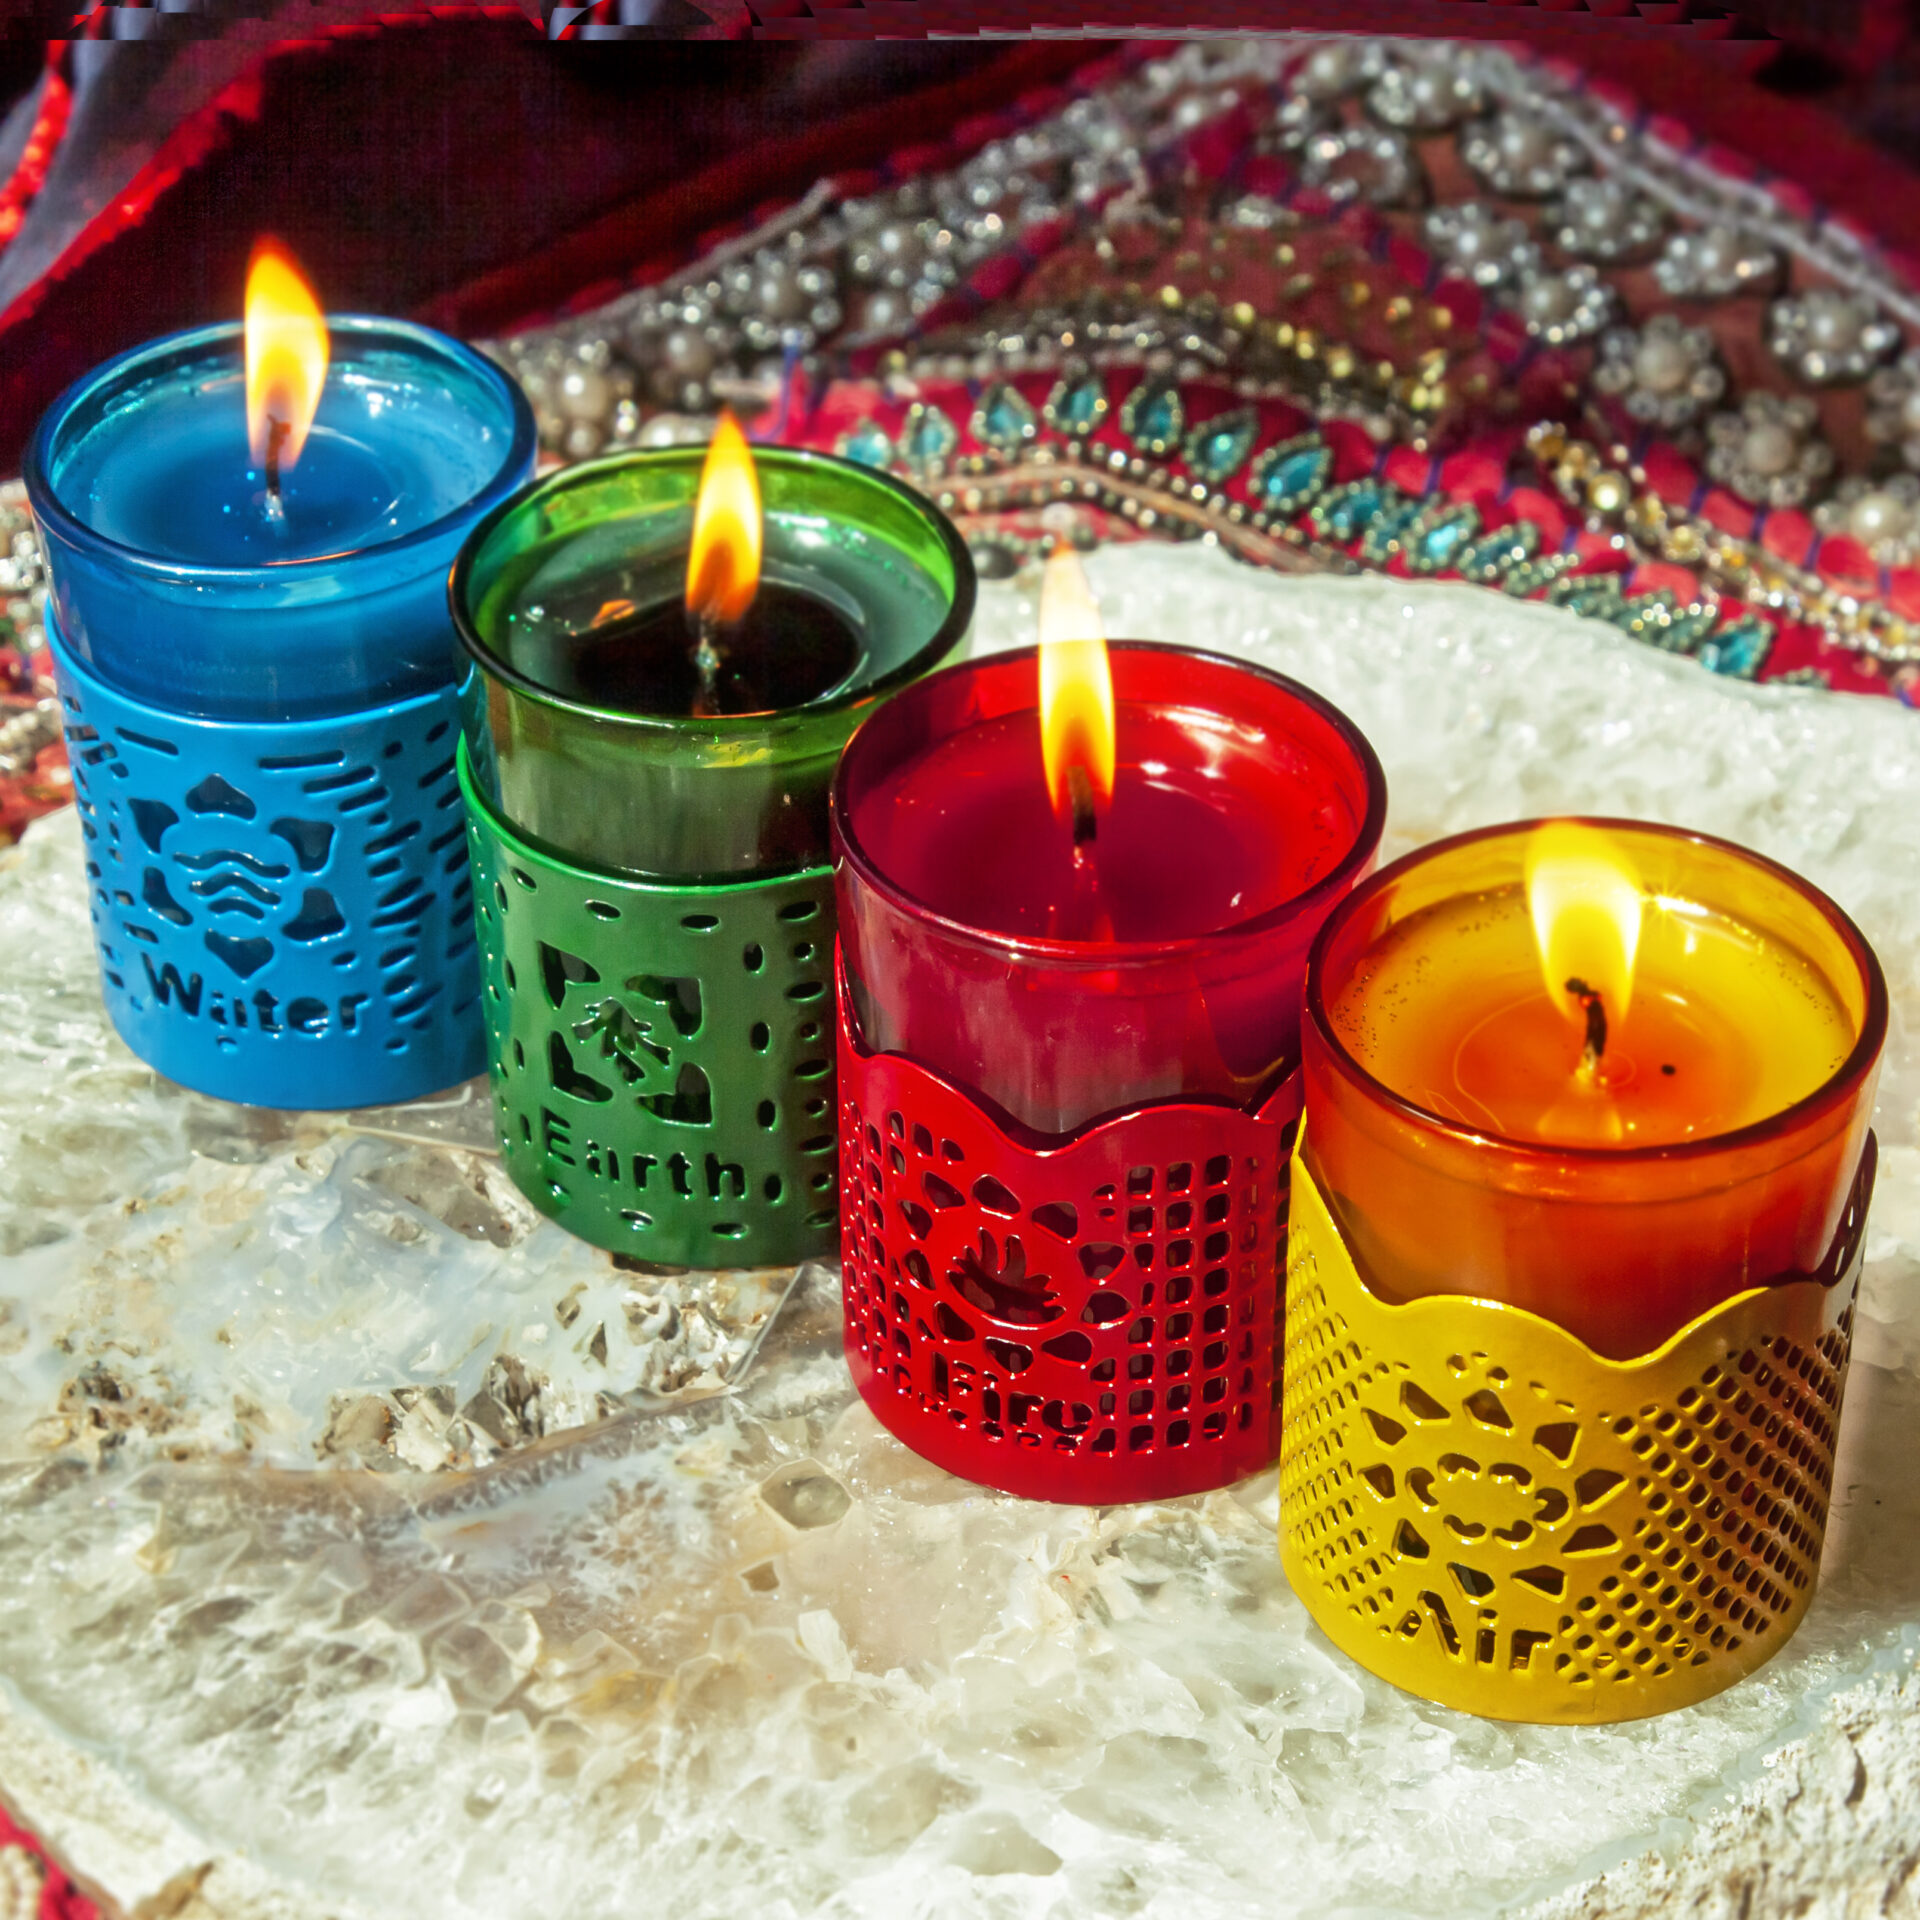 Set of Divination Magic Votive Ritual Reiki Infused Candles